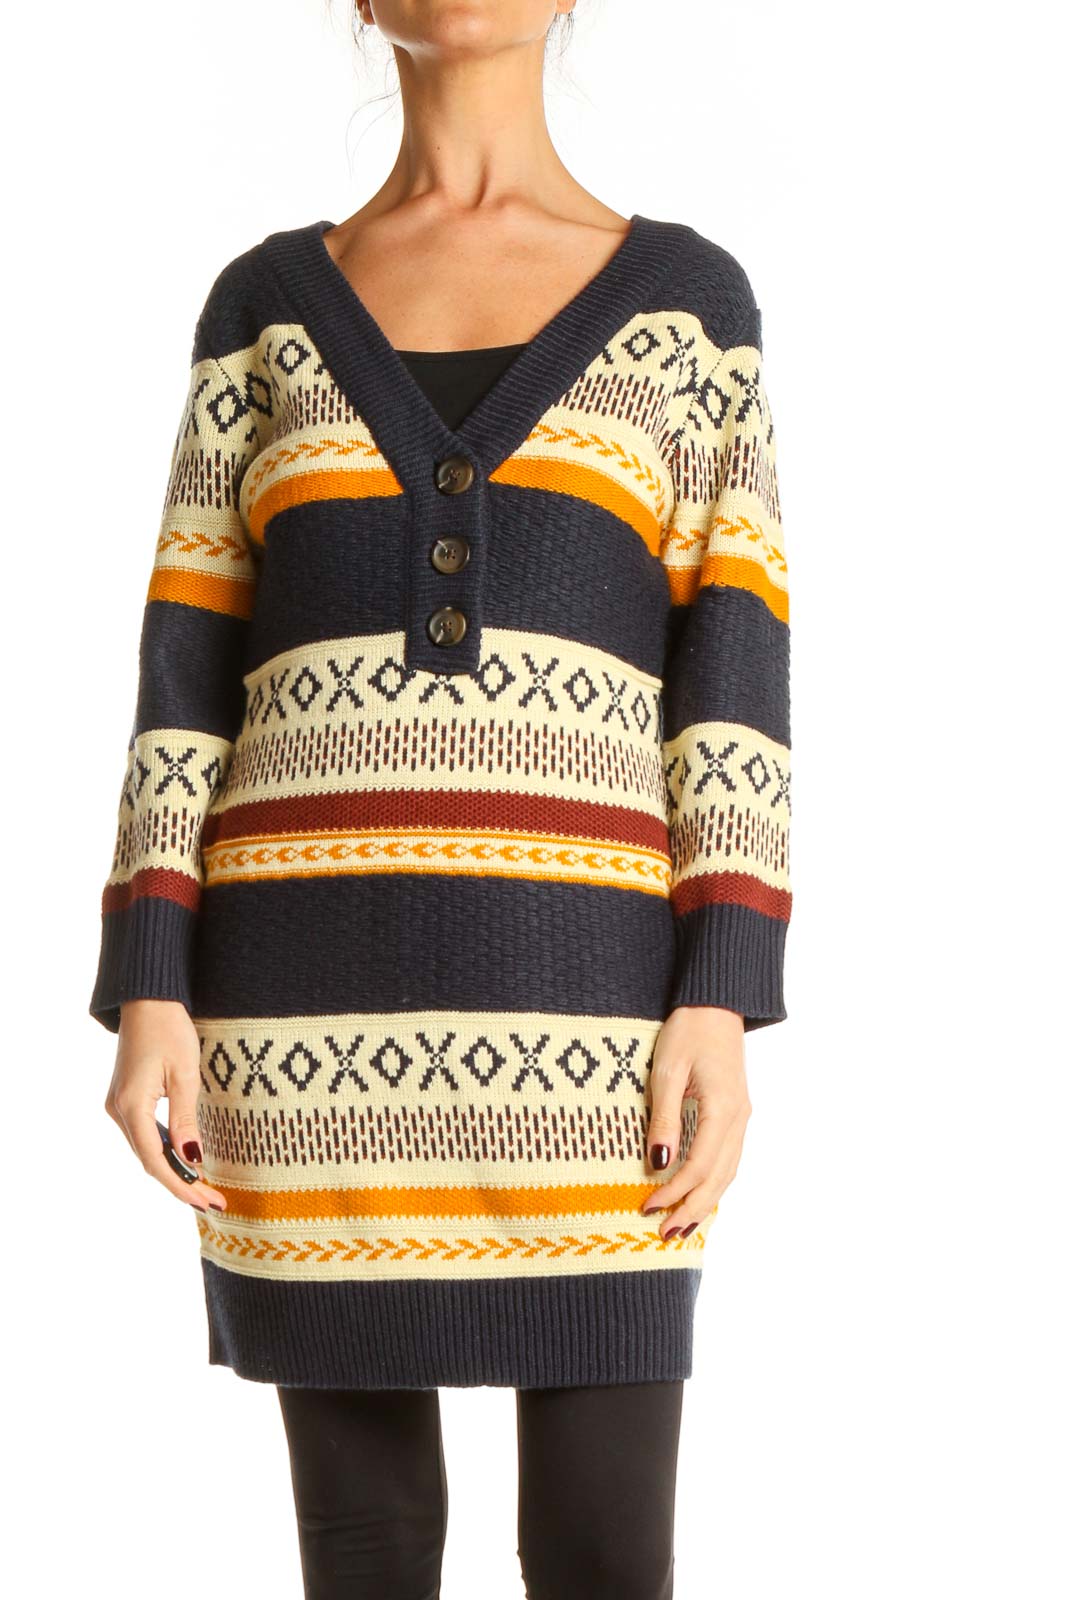 Blue Aztec Print All Day Wear Long Sweater Front